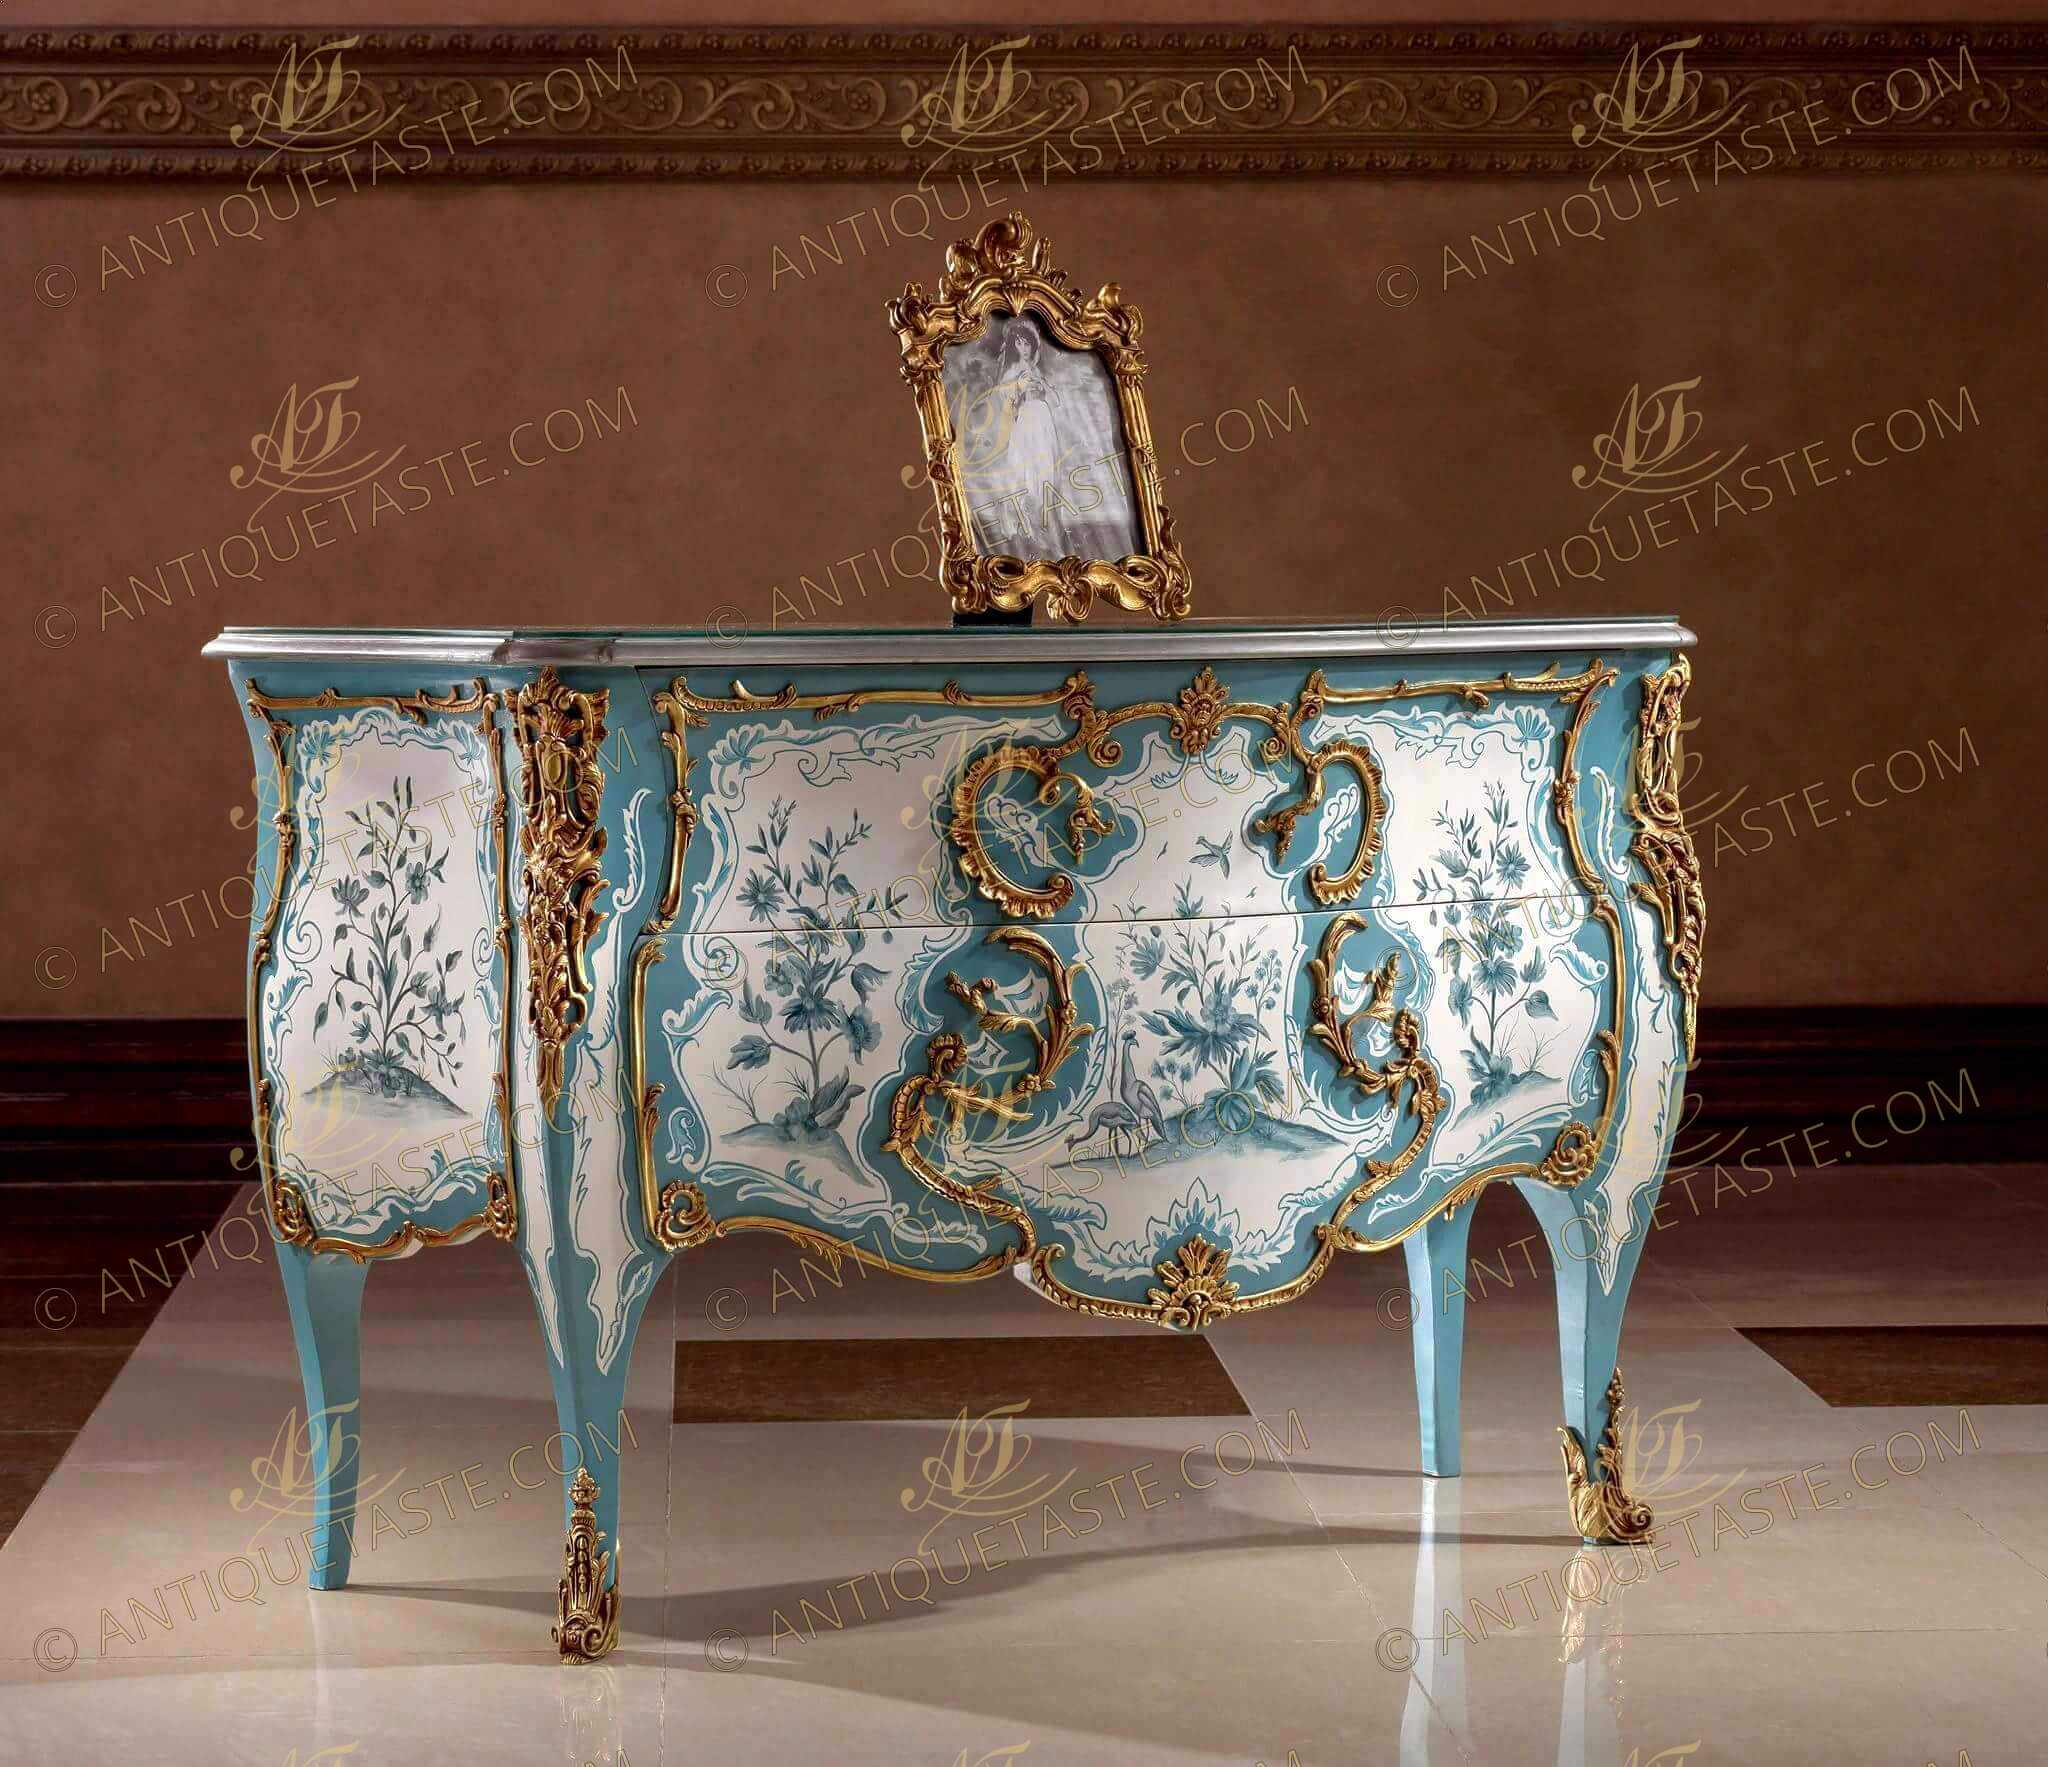 XVIIIth century Louis XV Rococo Vernis Martin style ormolu-mounted bleu et blanc commode galbée of Madame de Mailly after the model by master Mathieu Criaerd Circa 1742, Paris, now located in Louvre Museum, The fine piece with serpentine shaped eared moulded top above two conforming twp long deep drawers professionally hand painted by our artisans as the original piece with equatorial fauna and floral pattern within a highly chiseled and burnished gilt-ormolu foliate trimmed border issuing Rococo motives of shell C scrolls, branches and leaves with leafy ormolu handles emerged from the decoration, Each corner with exquisite large pierced ormolu foliate chutes terminating with extraordinary volute wrap around foliate ormolu sabots covering the cabriole legs, The sides has the same movements